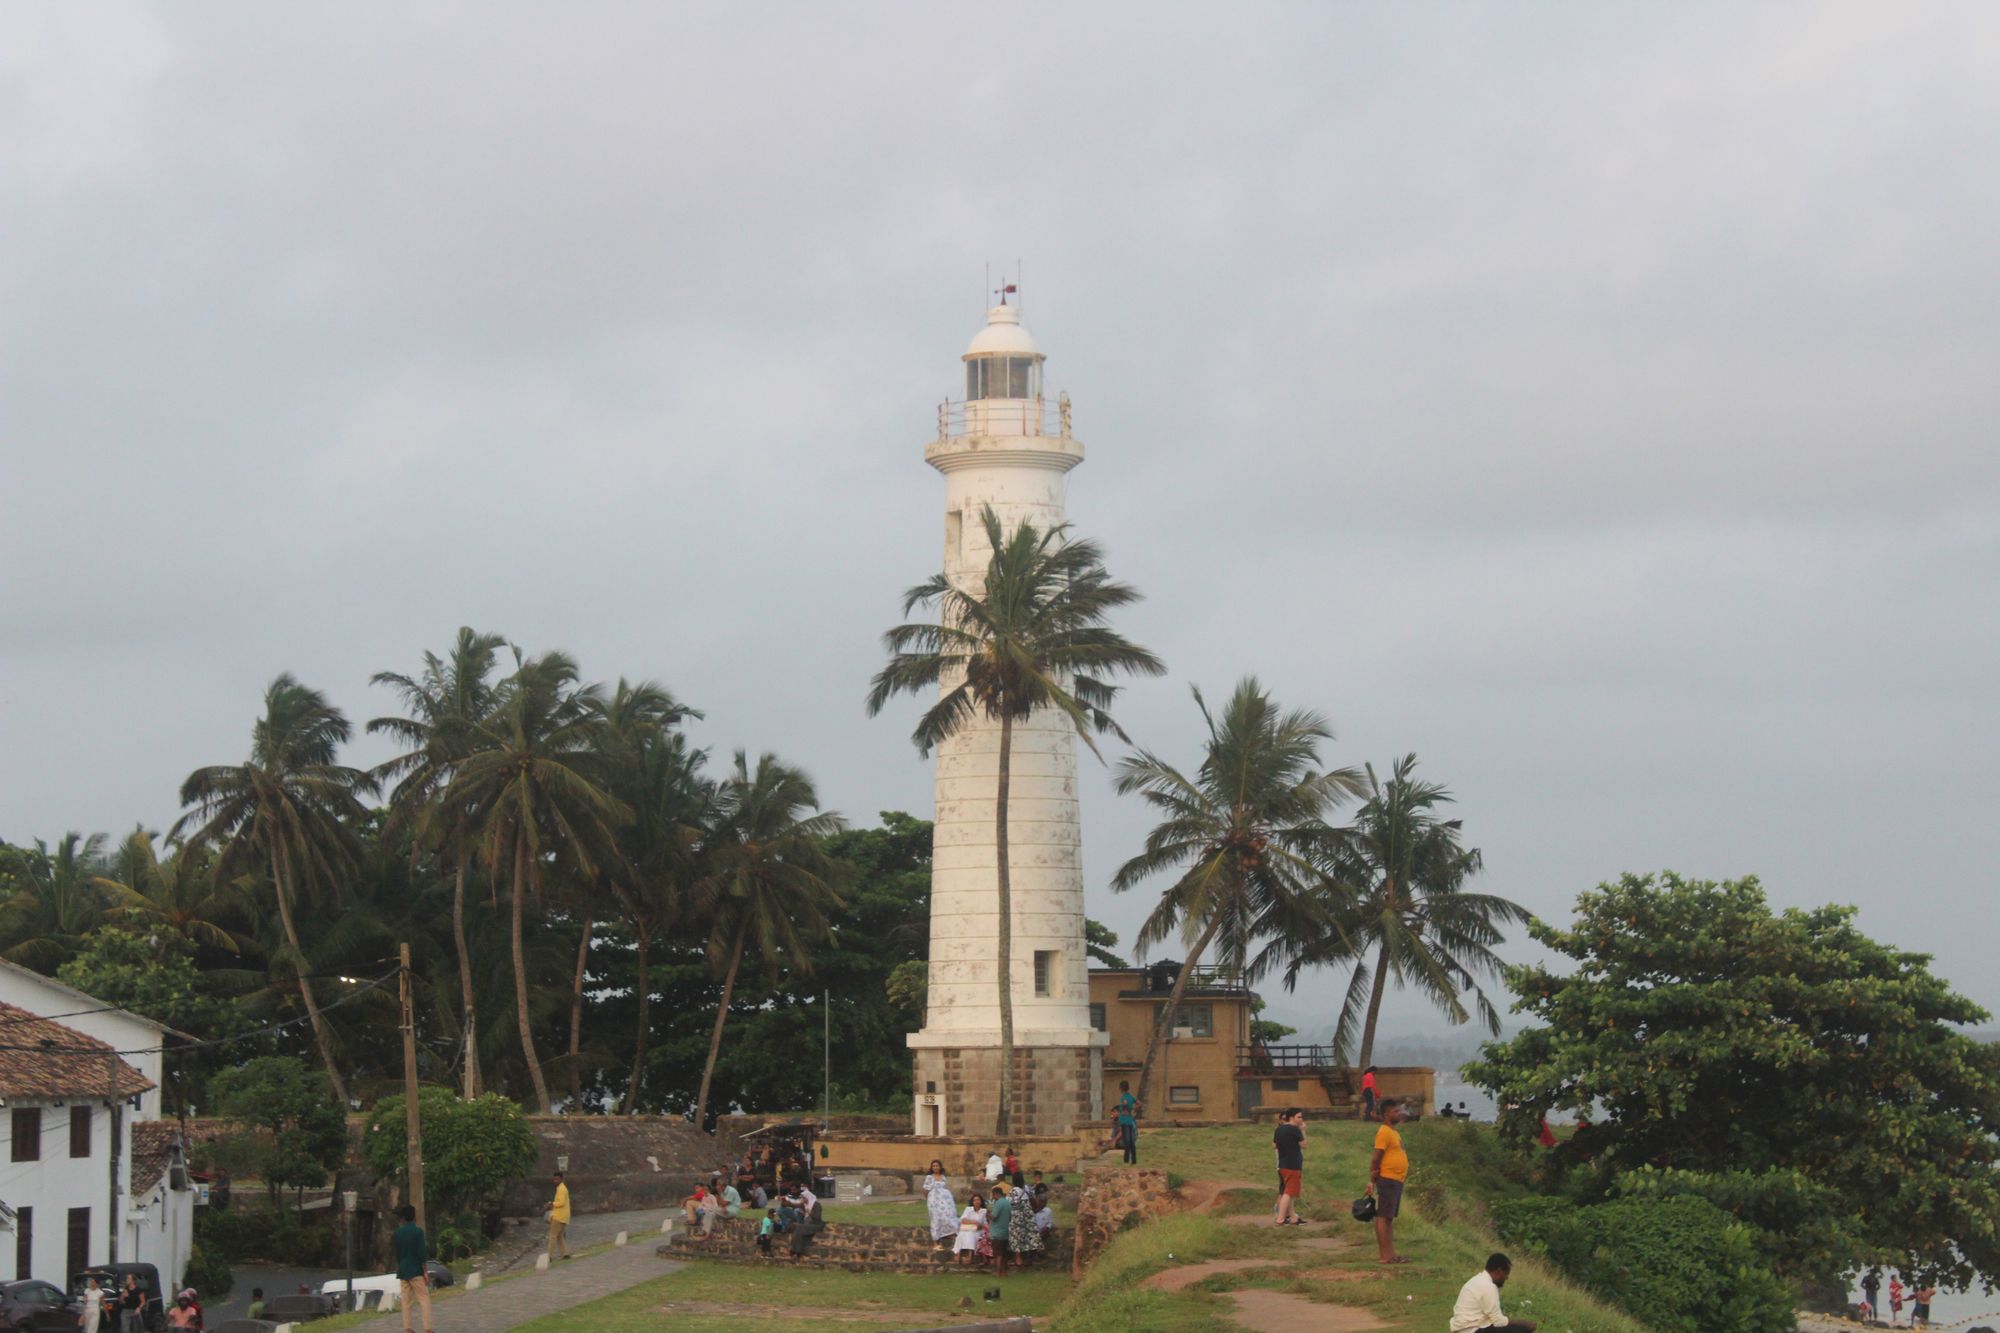 The Galle Fort Lighthouse in Sri Lanka, with locals and tourists gathered nearby to enjoy the view.